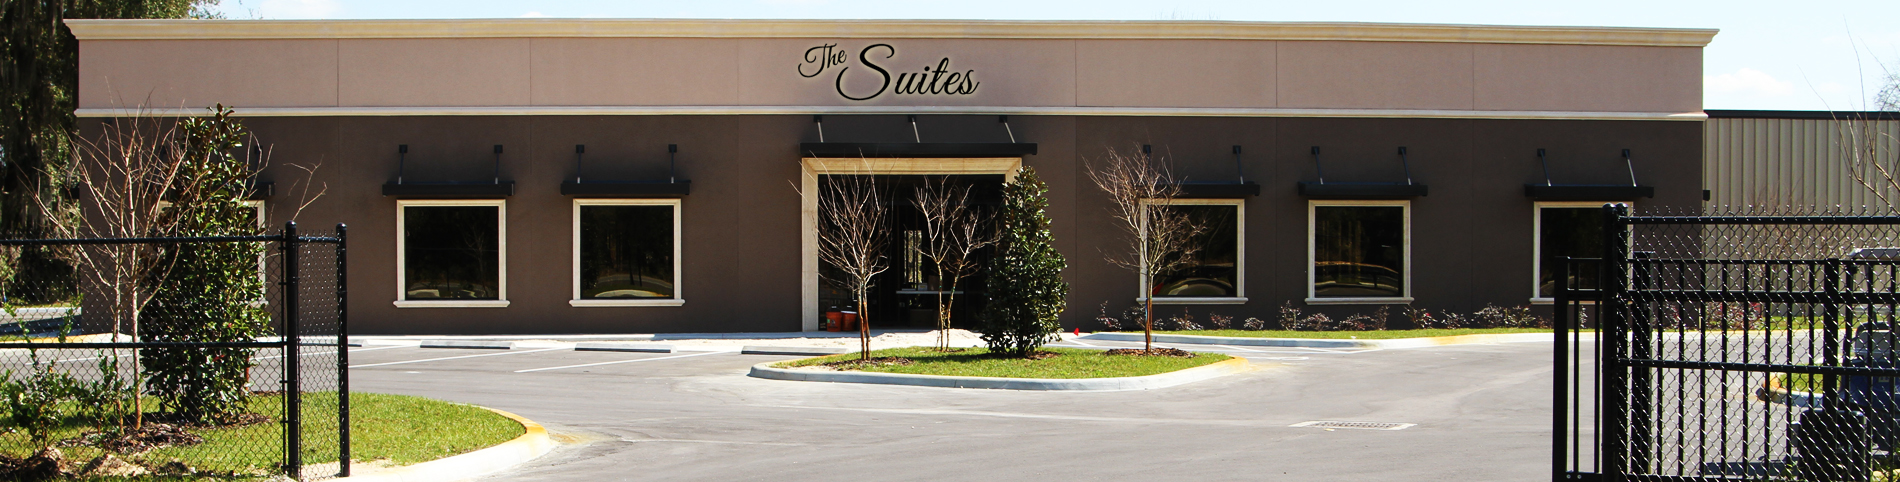 The Suites at Hunt Industrial Park